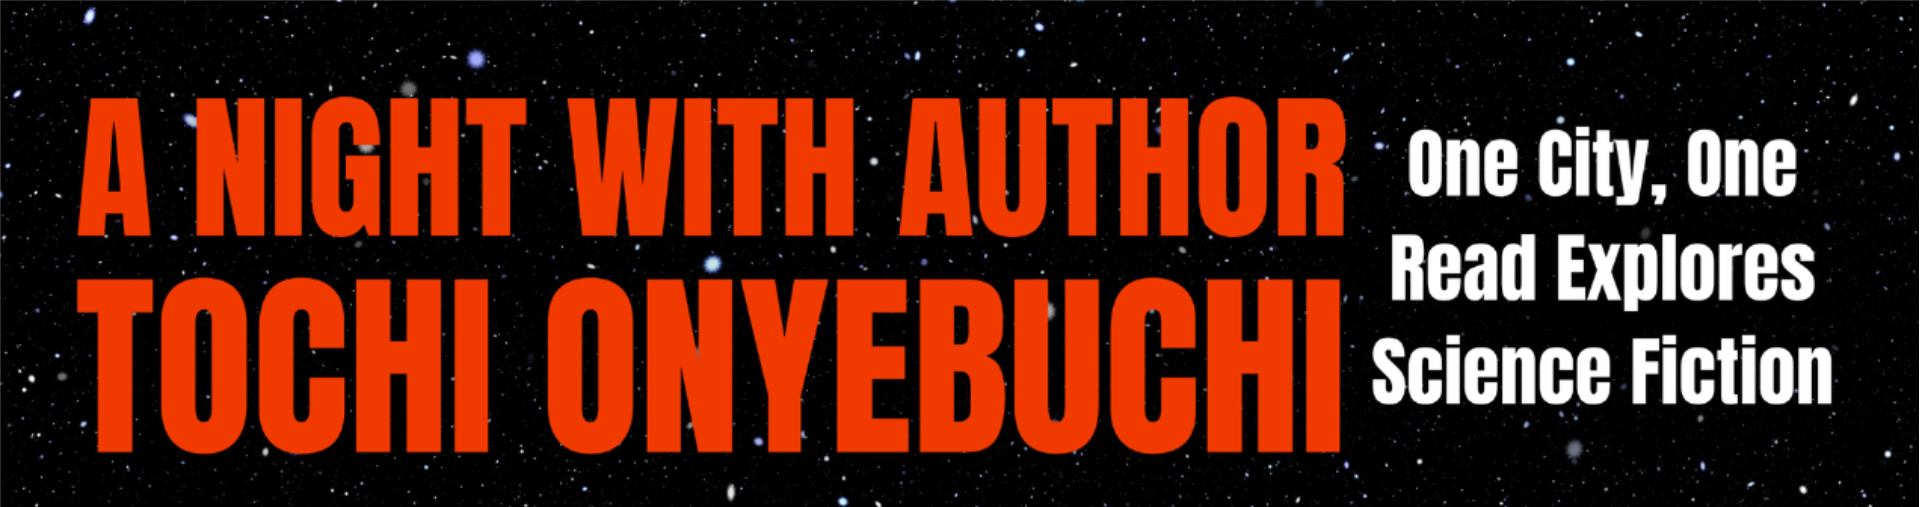 A starry sky background with the text: A night with author Tochi Onyebuchi. One City, One Read Explores Science Fiction